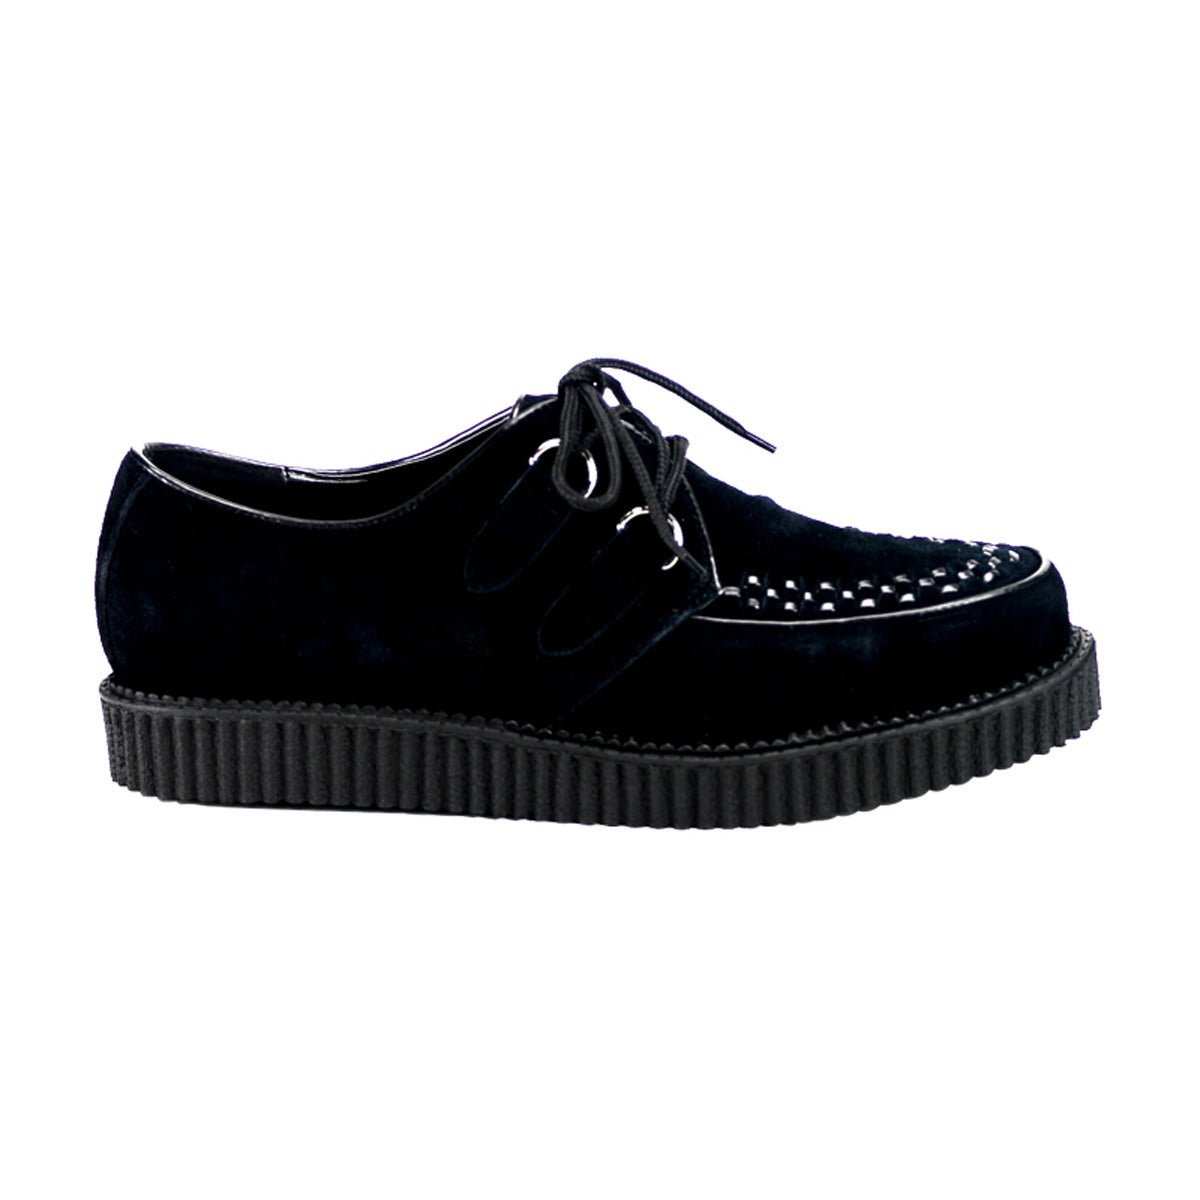 Clearance DemoniaCult Creeper 602S Black Suede Mens/Unisex Size 12UK/13USA